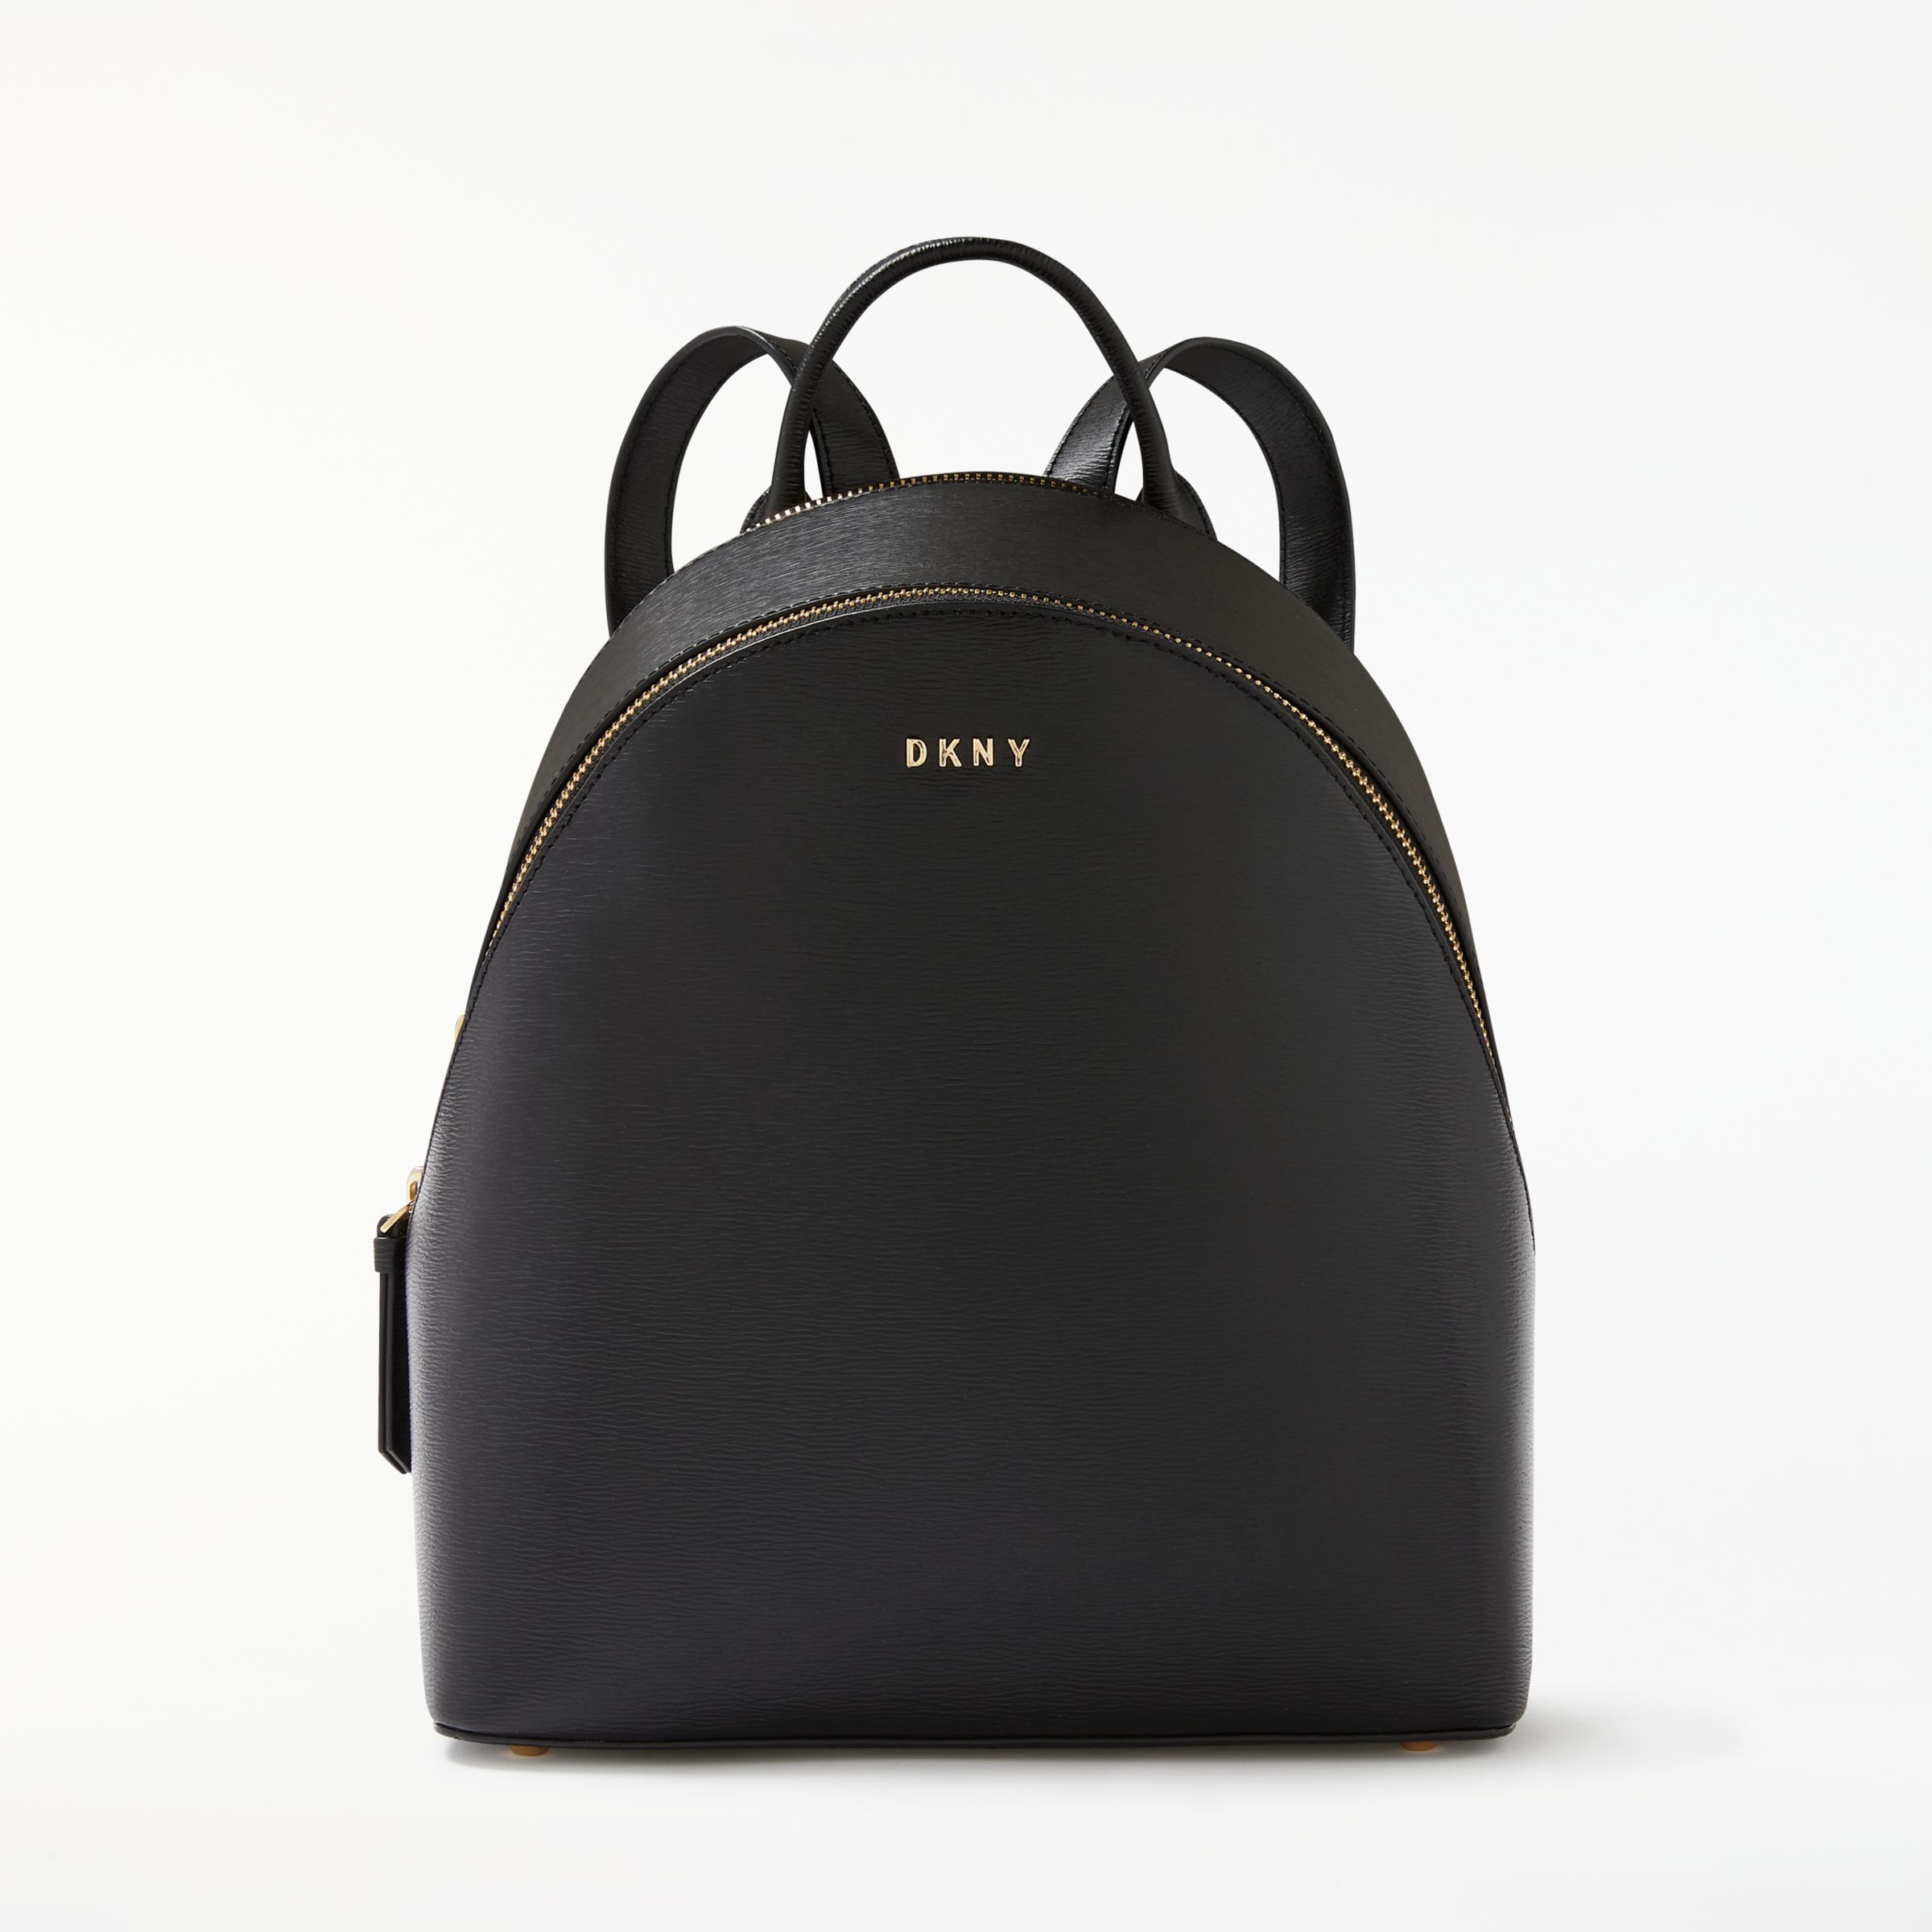 DKNY Sutton Textured Leather Medium Backpack, Black at John Lewis ...